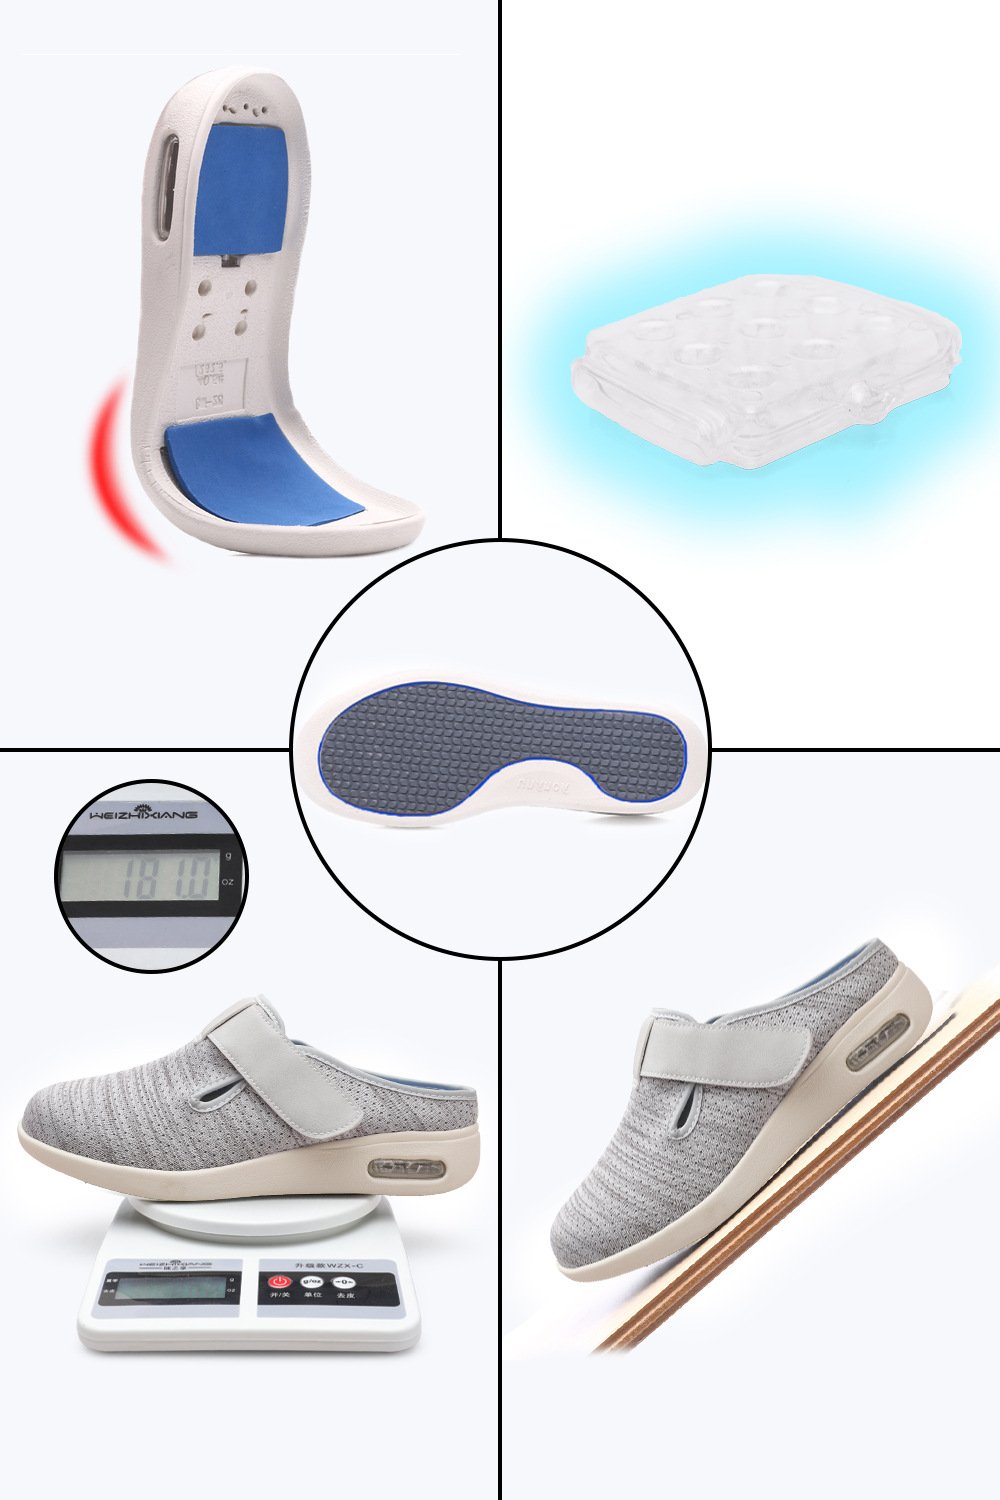 Fitsshoes Wide Diabetic For Swollen Feet Slip-on light air cushion orthopedic shoes